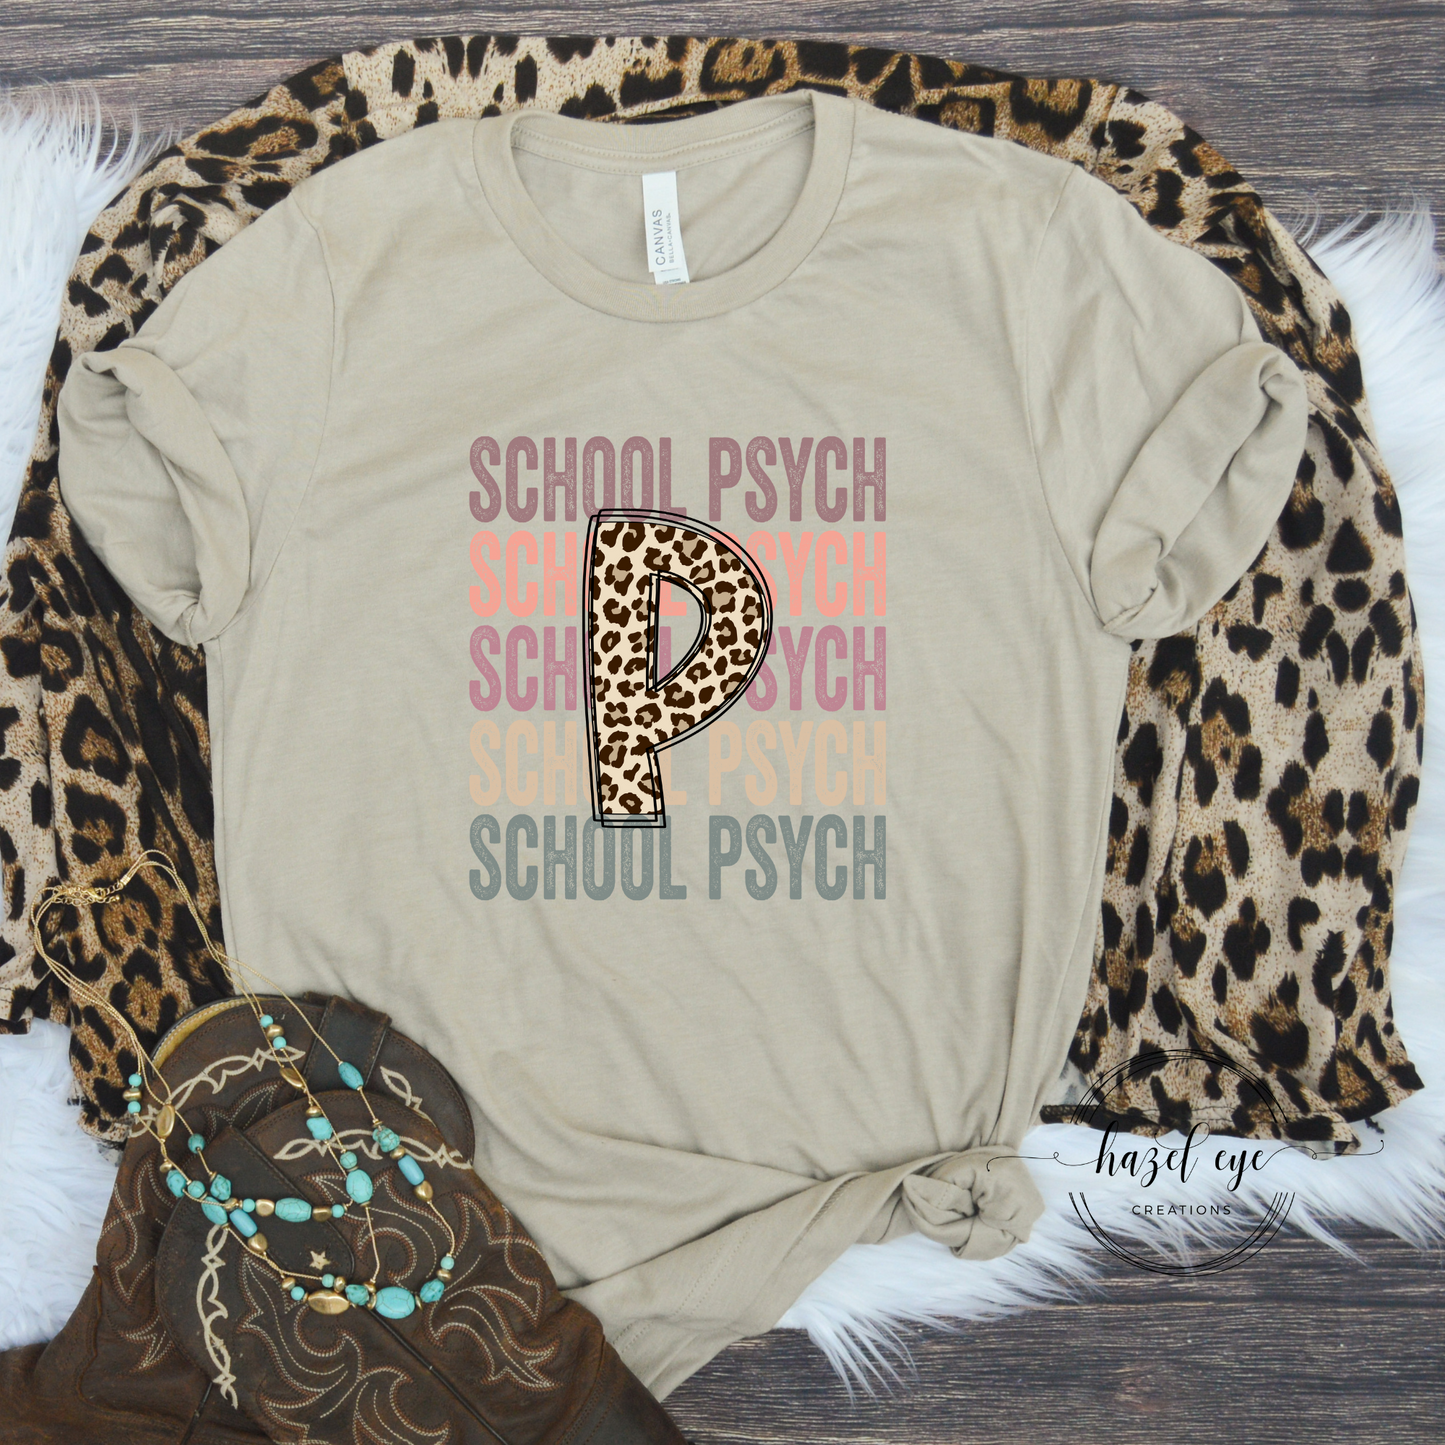 School psych stacked